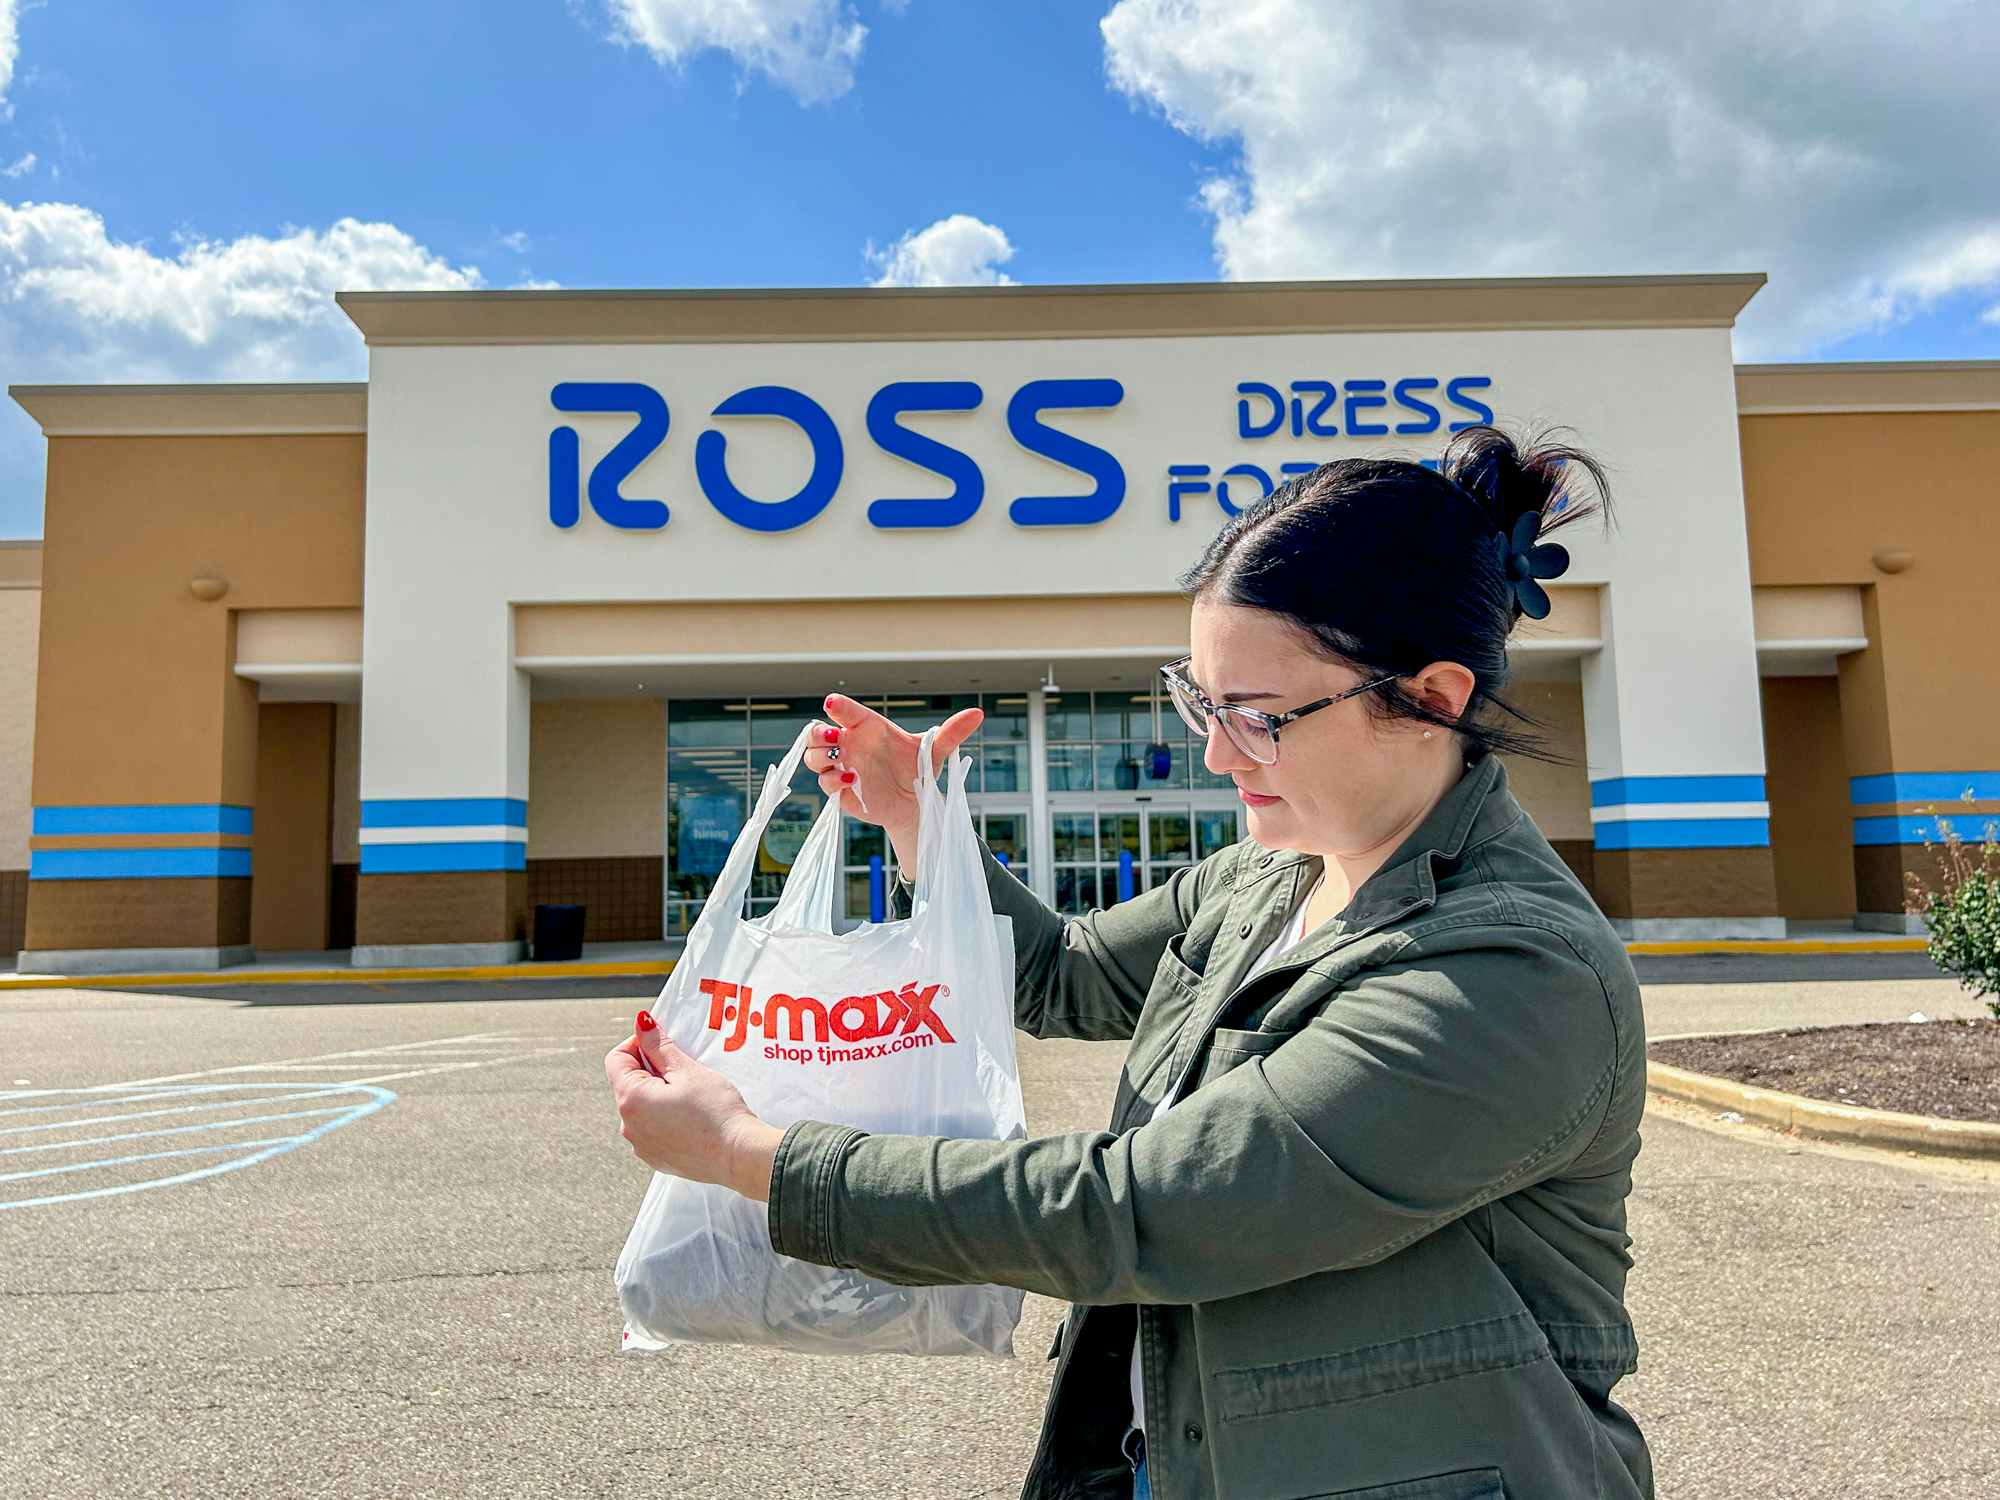 a person holding up a tj maxx bag in front of a ross sign